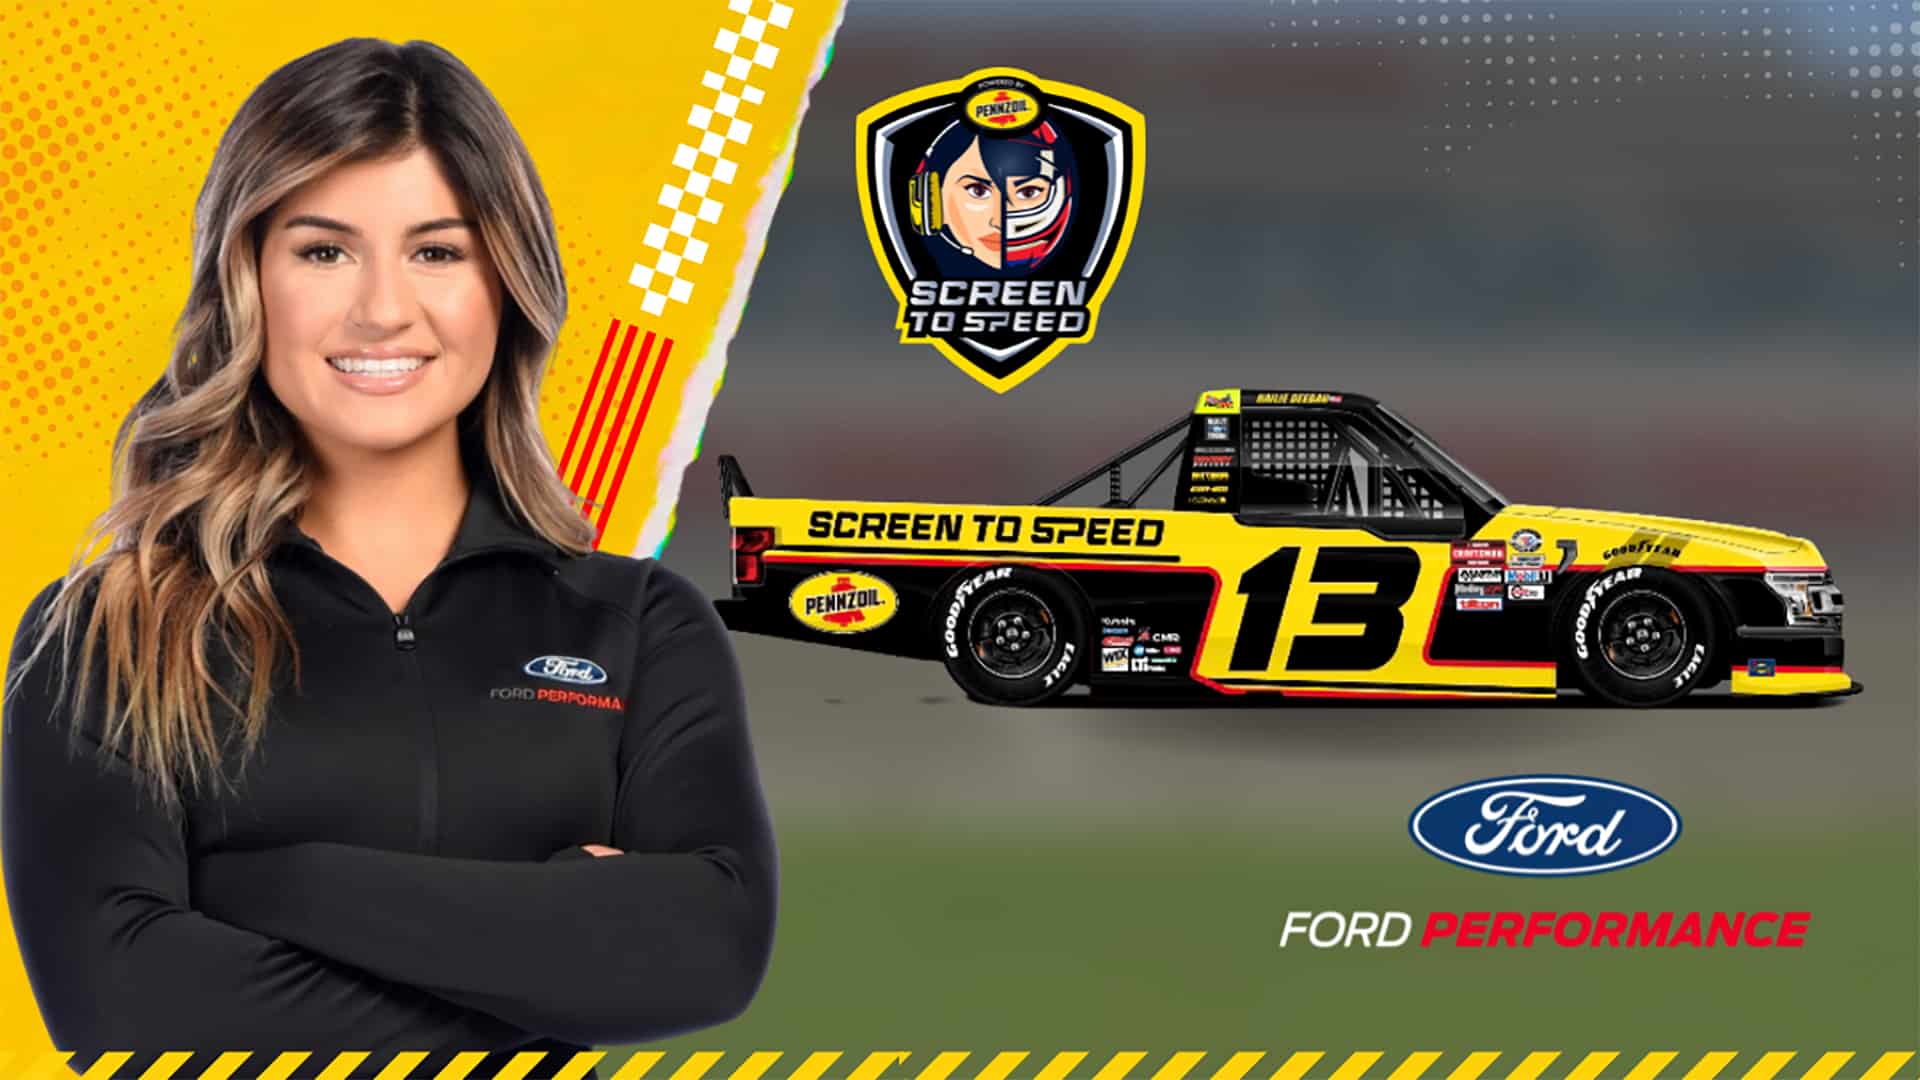 Hailie Deegan racing in Screen to Speed truck at Las Vegas on Friday Traxion